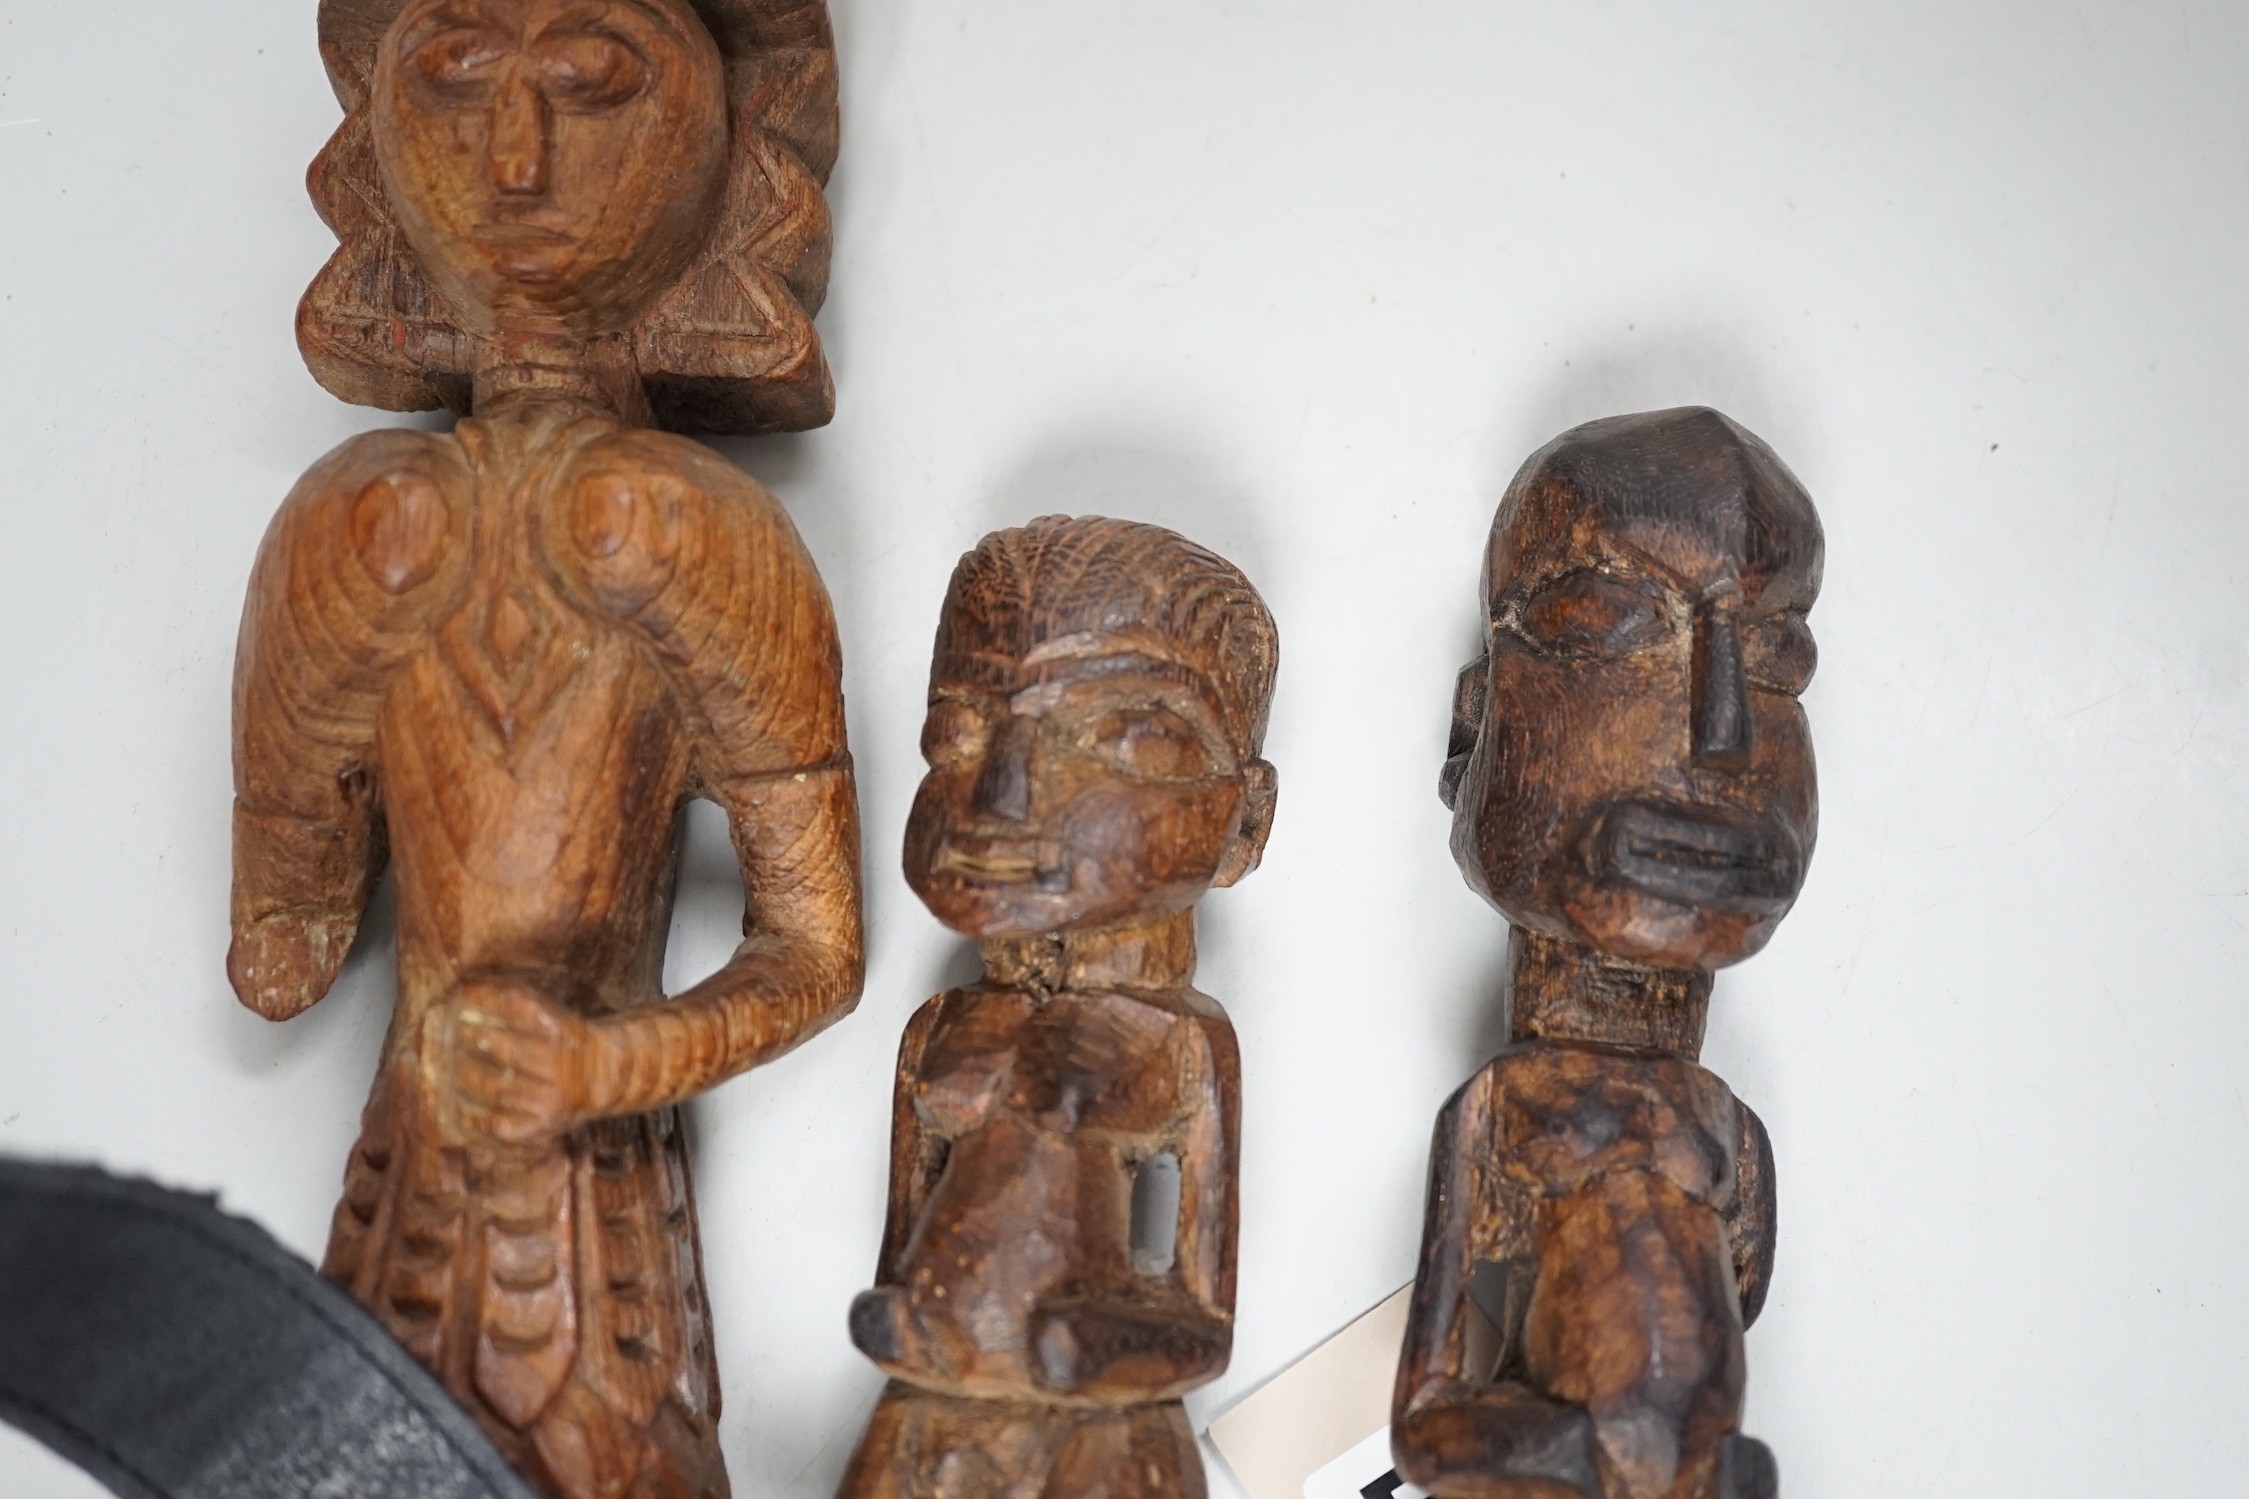 A carved teak terminal figure and two African tribal figures, largest 32cm long